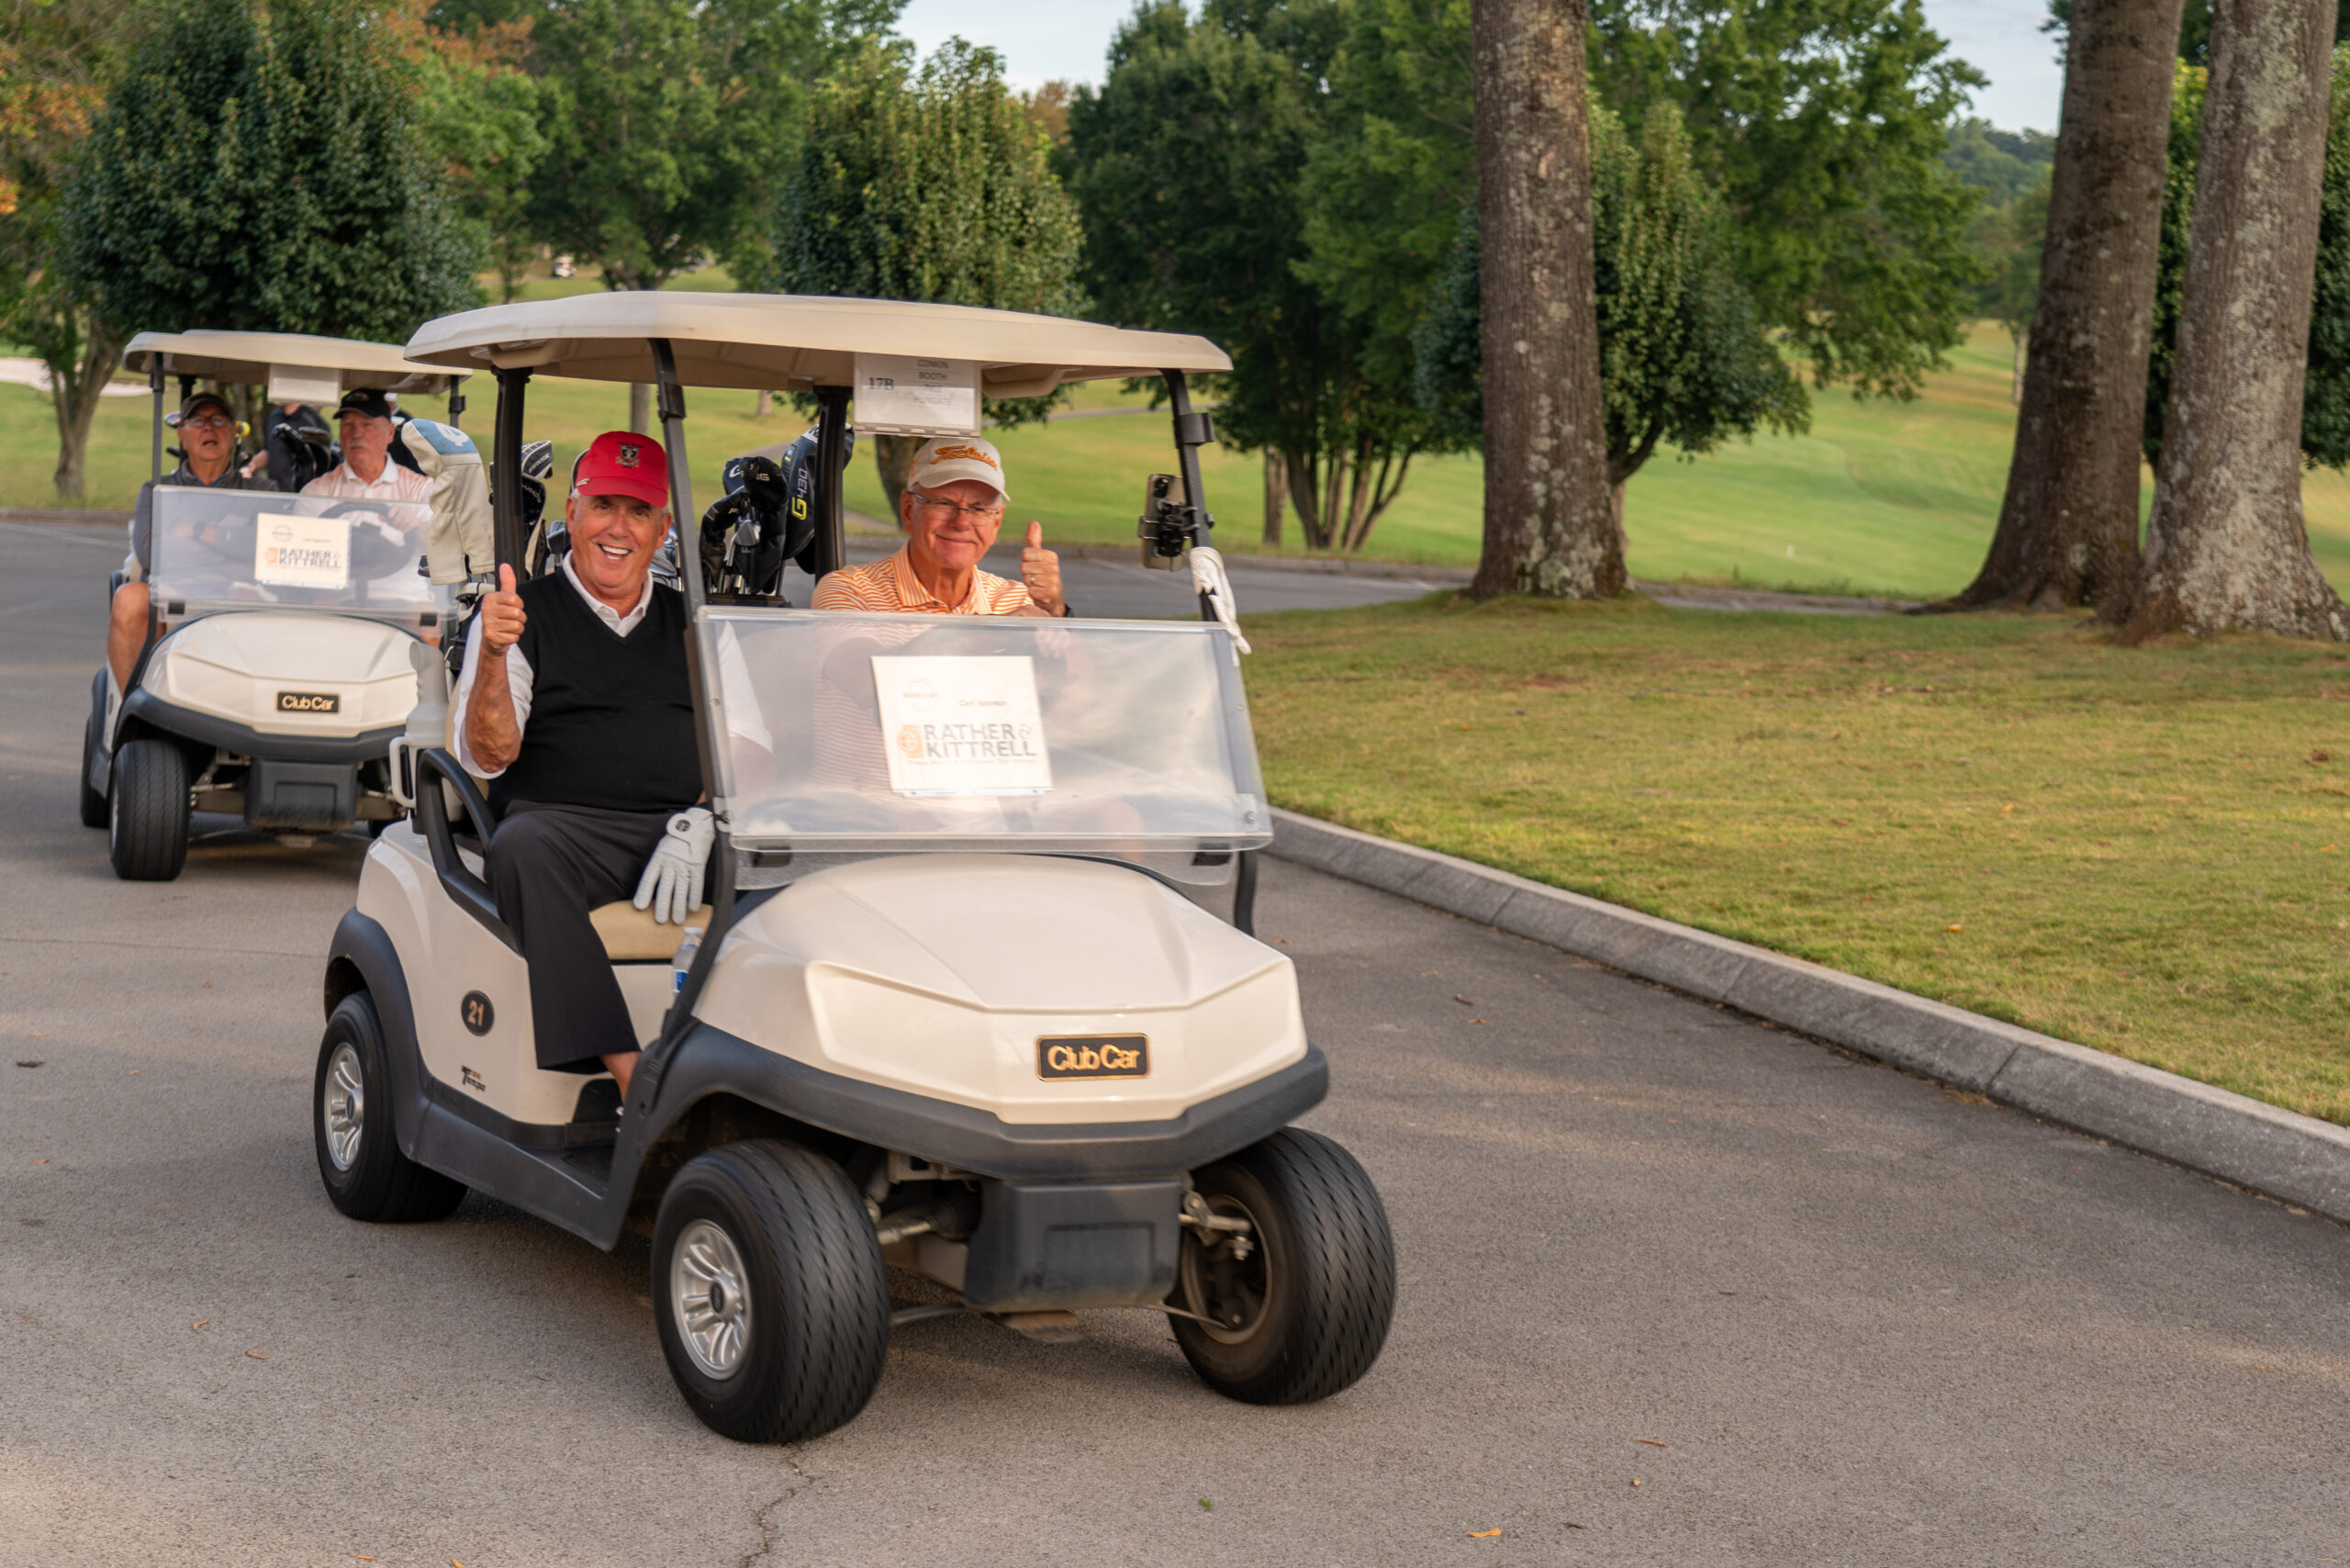 A group of people on a golf cart.